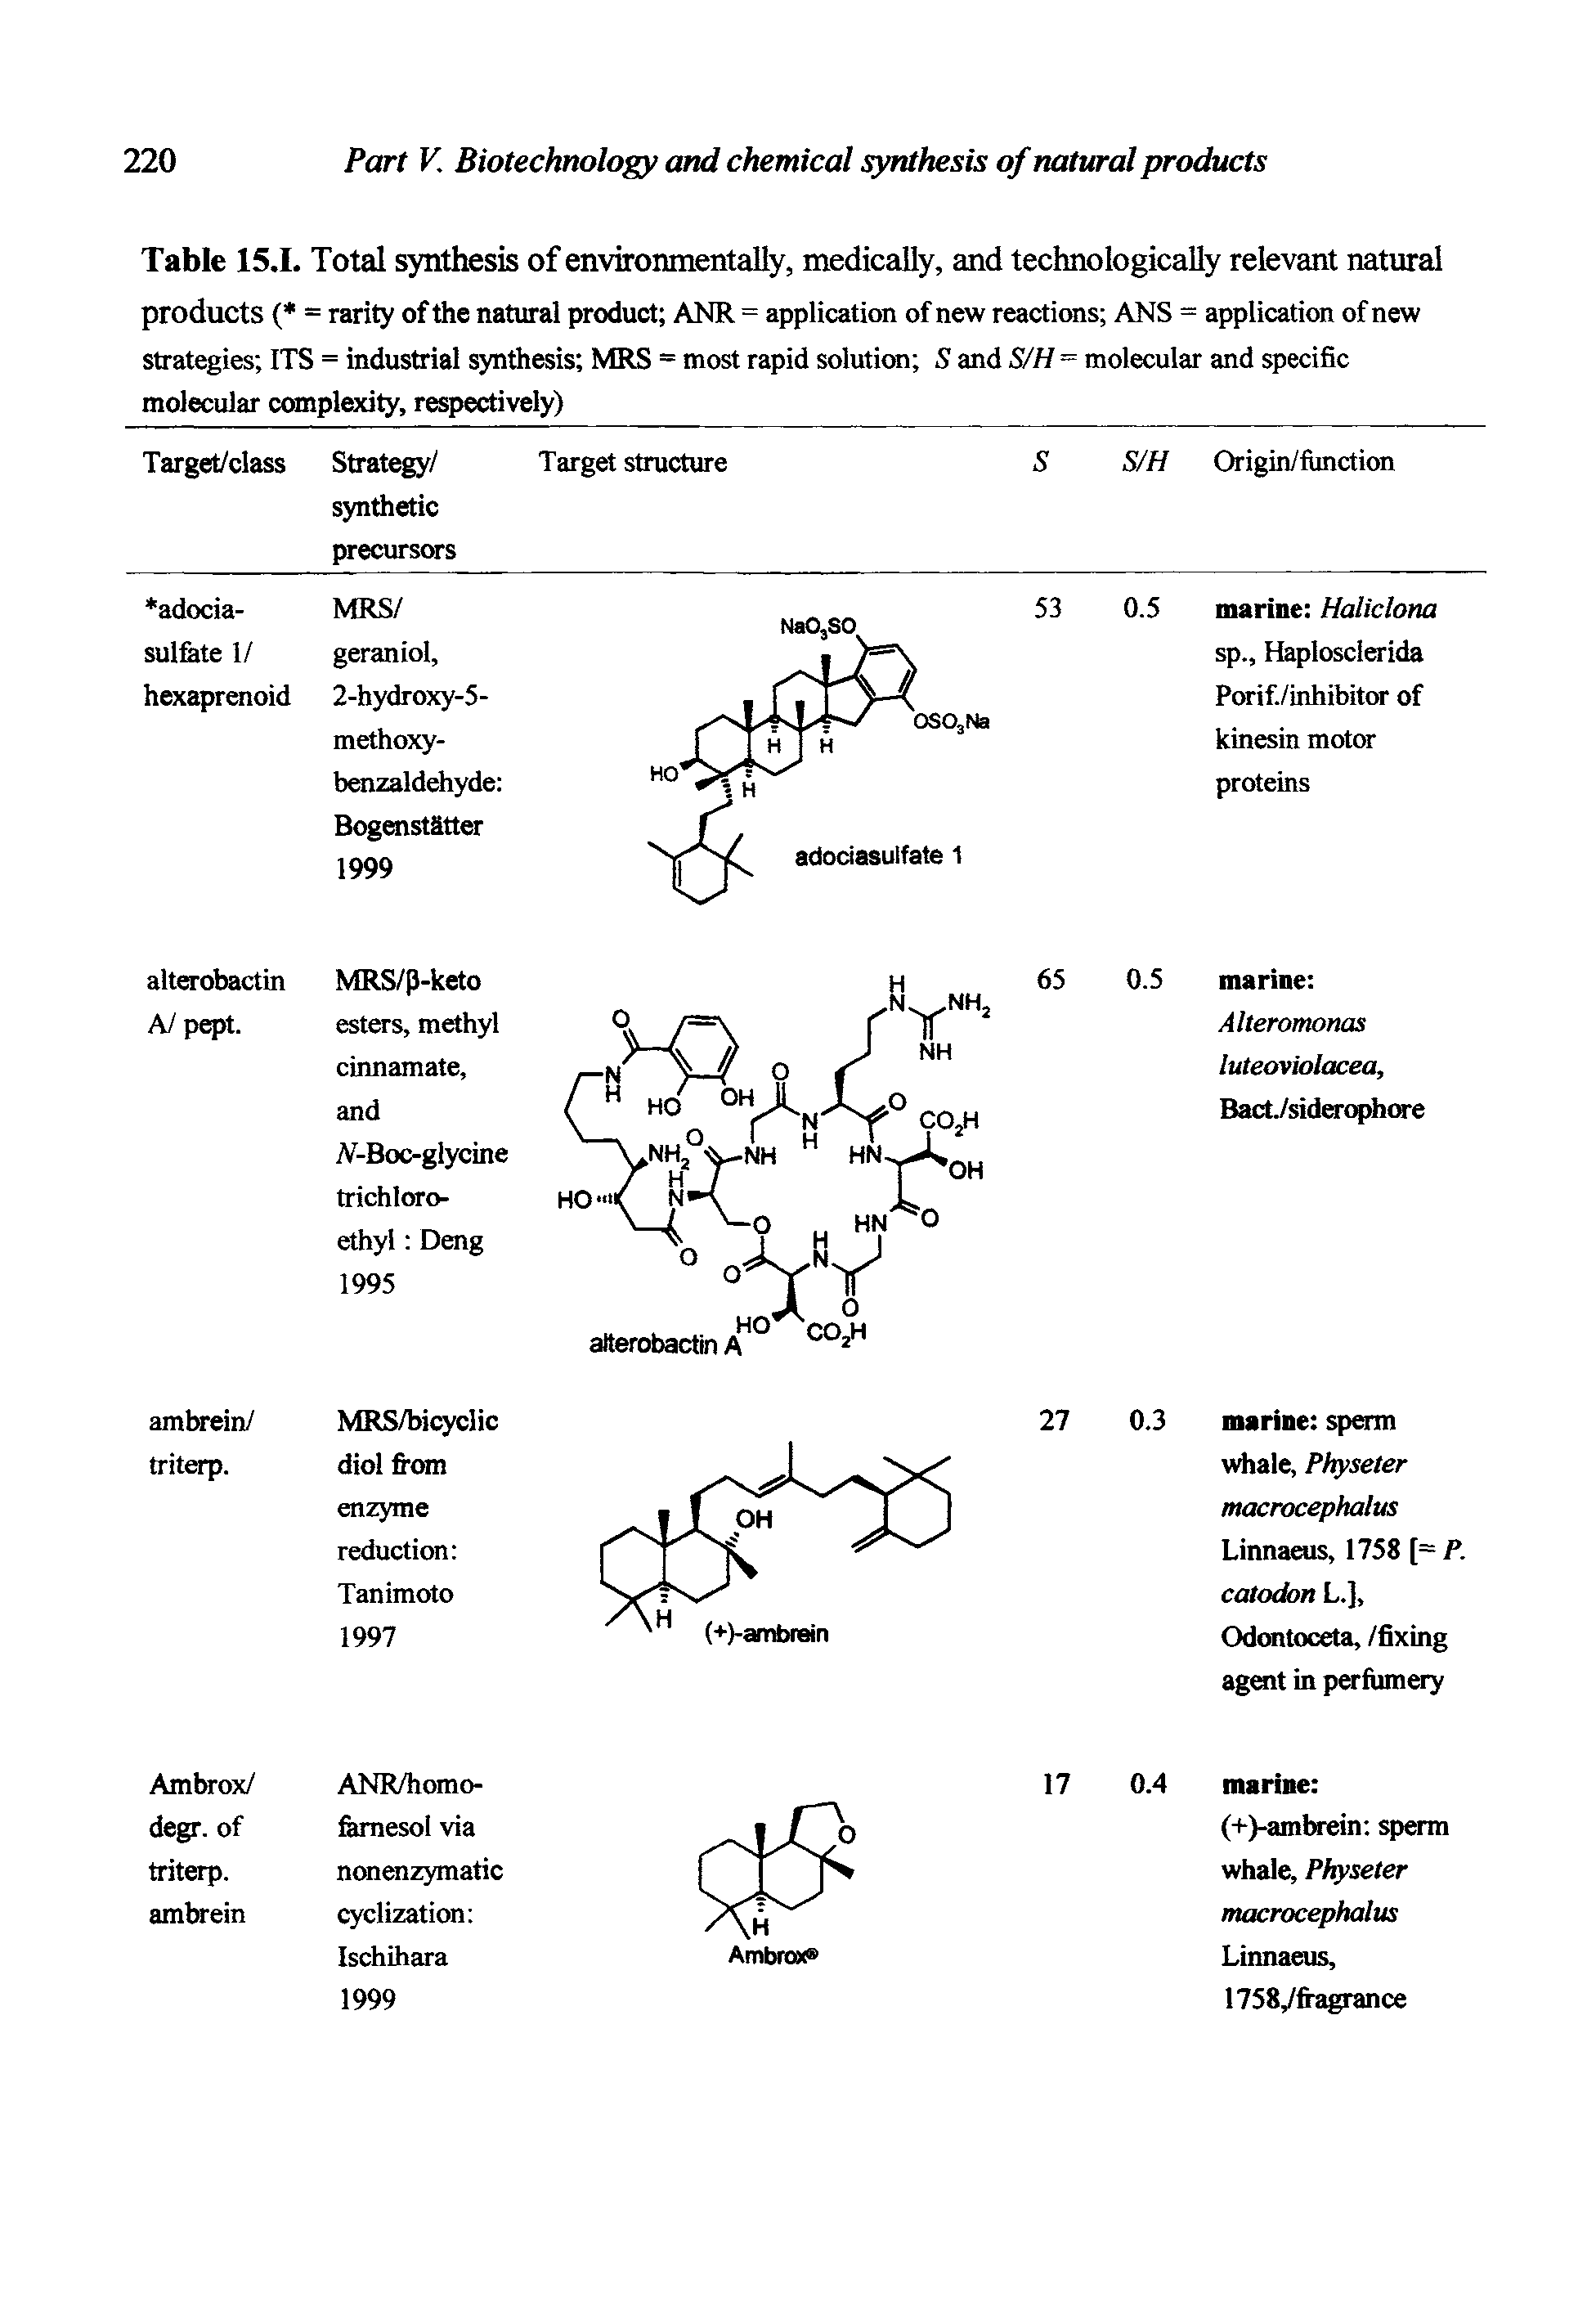 Table 15.1. Total synthesis of environmentally, medically, and technologically relevant natural products ( = rarity of the natural product ANR = application of new reactions ANS = application of new strategies ITS = industrial synthesis MRS = most rapid solution S and S/H = molecular and specific molecular complexity, respectively)...